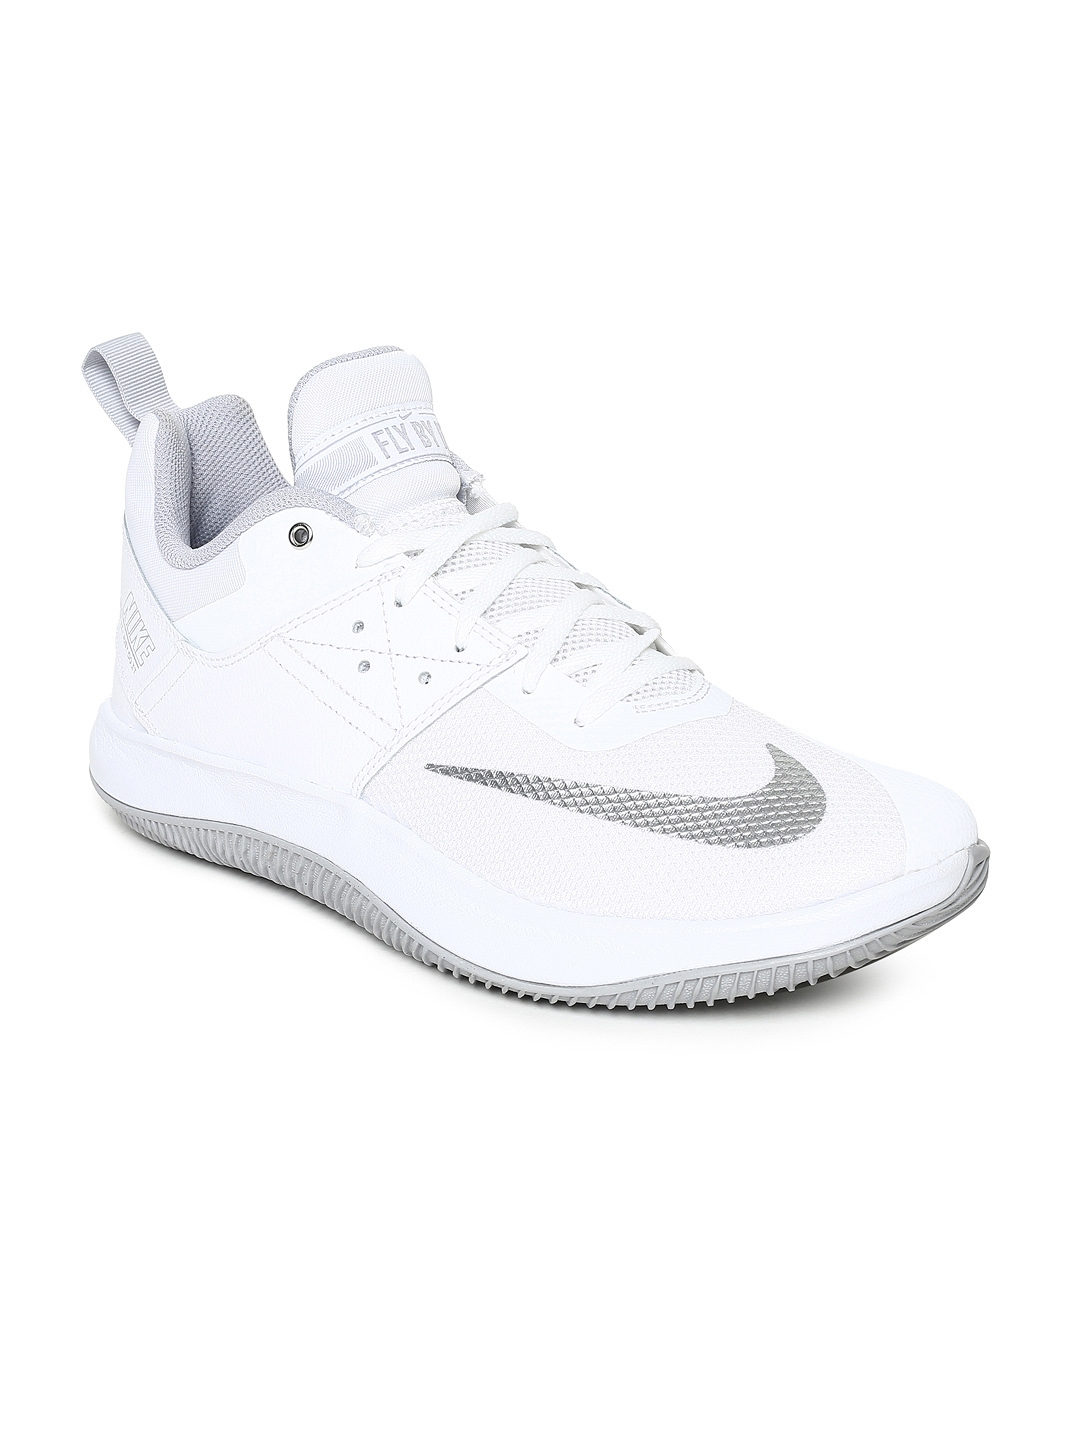 nike flyby low 2 white